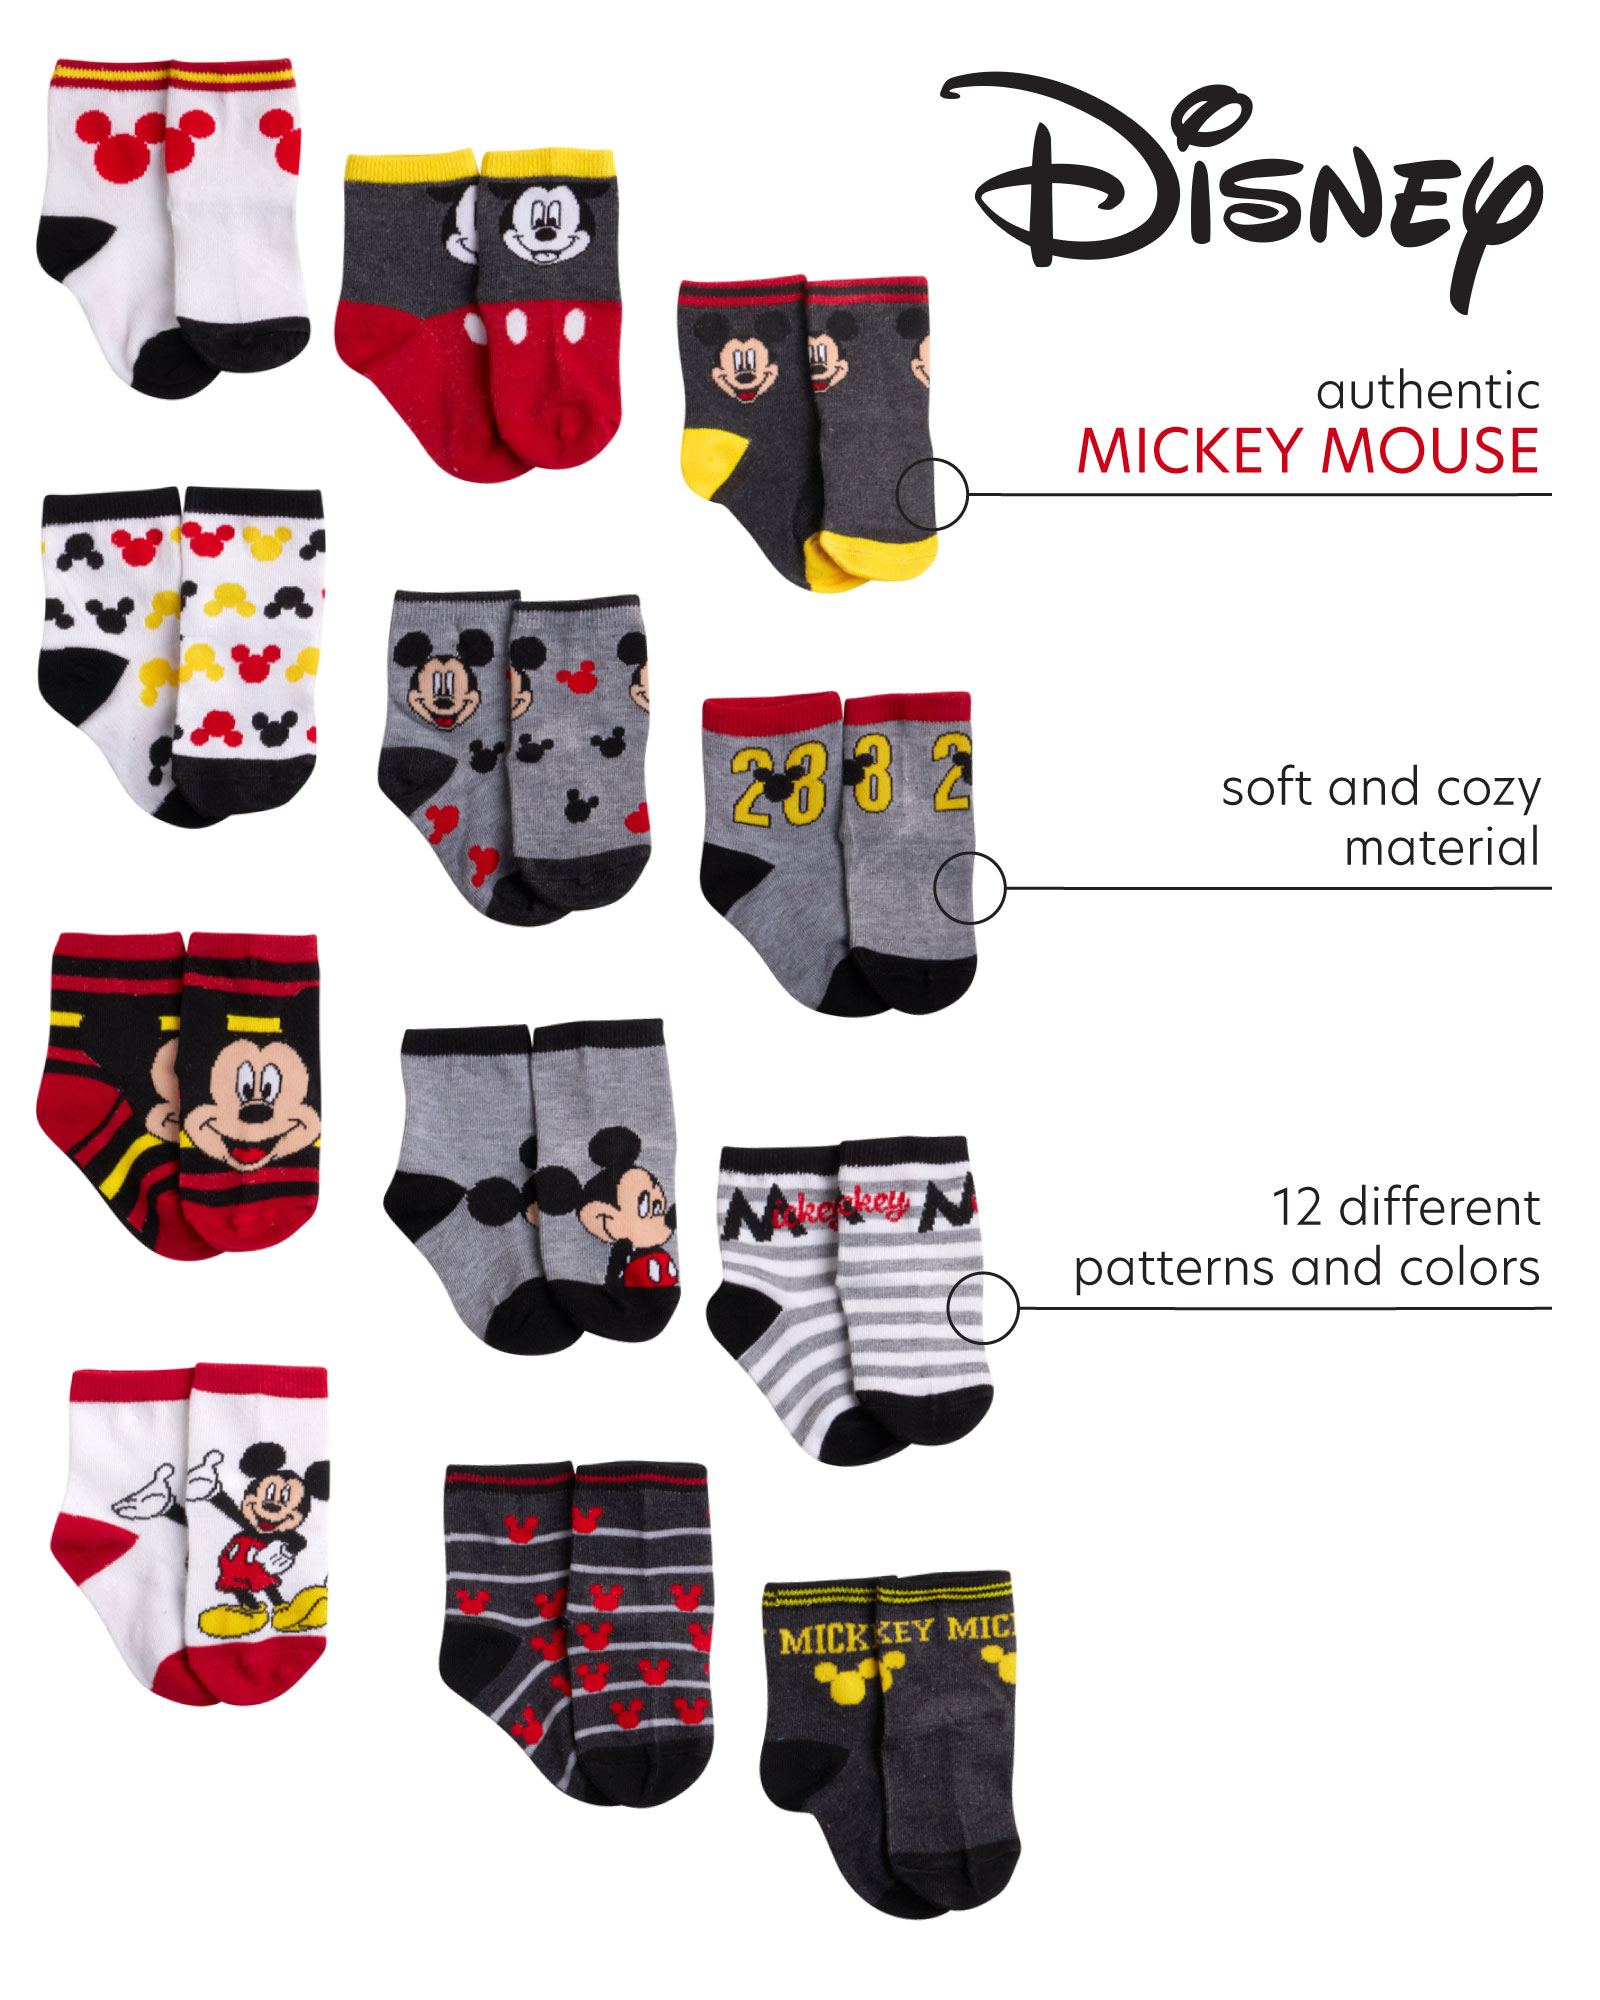 Disney Baby Boys Mickey Mouse Assorted Color Design 12 Pair Socks Set, Age 0-24 Months - image 2 of 5